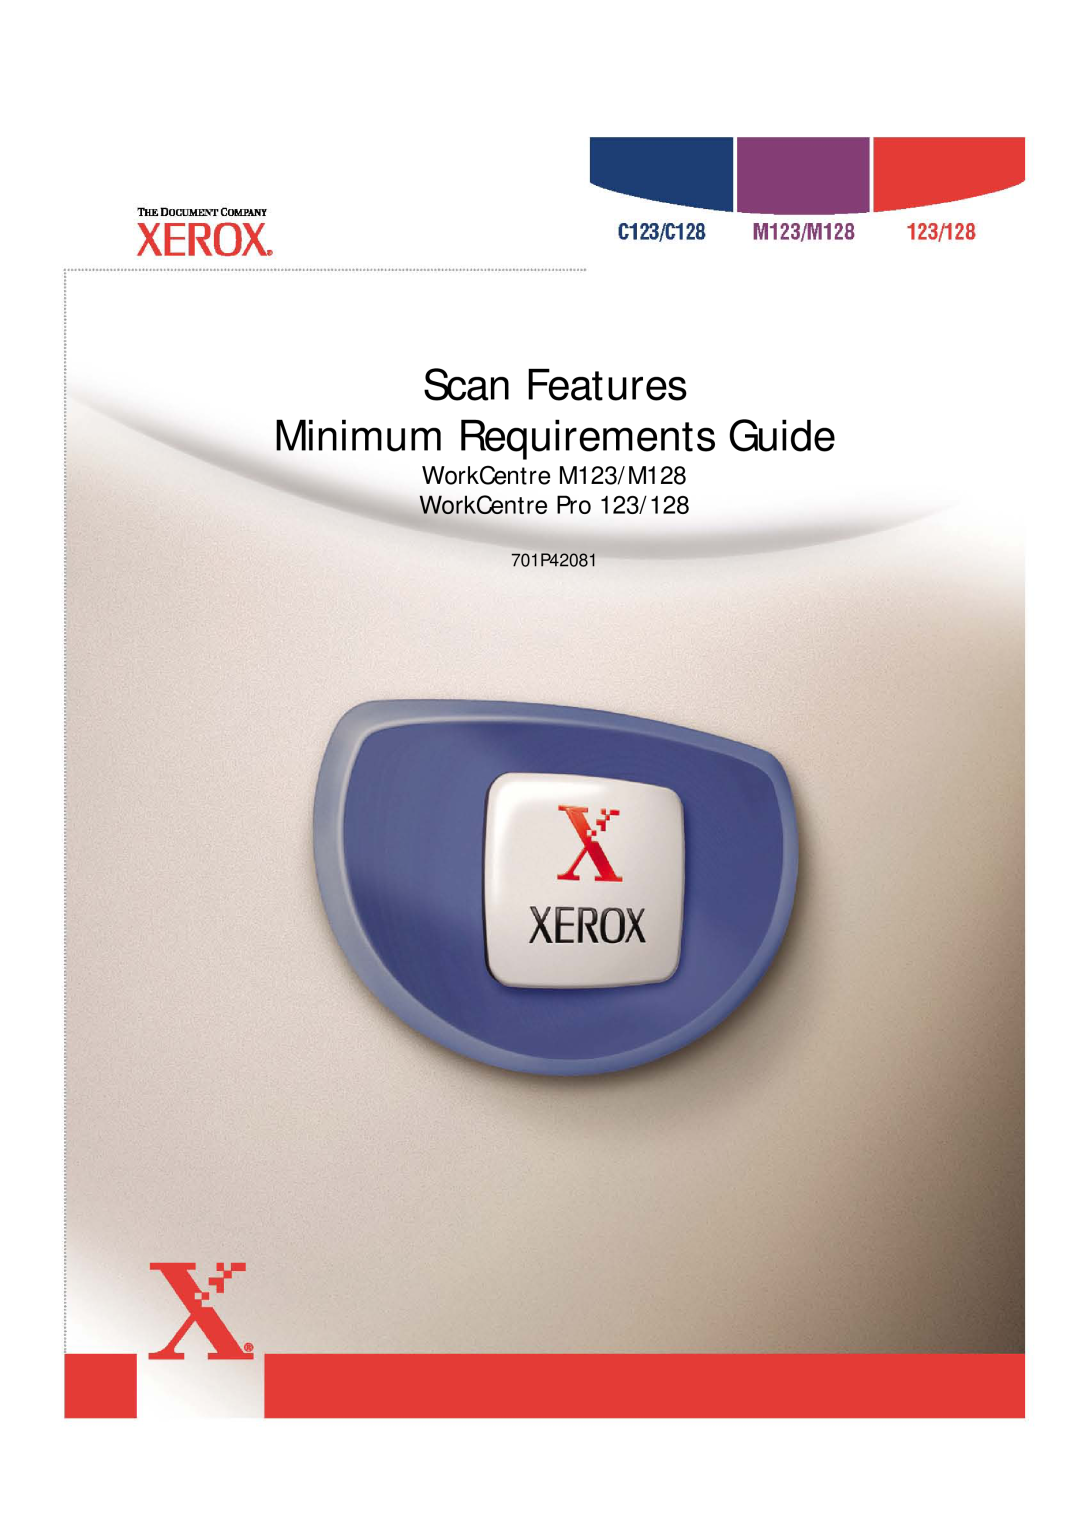 Xerox manual Scan Features Minimum Requirements Guide, WorkCentre M123/M128 WorkCentre Pro 123/128, 701P42081 